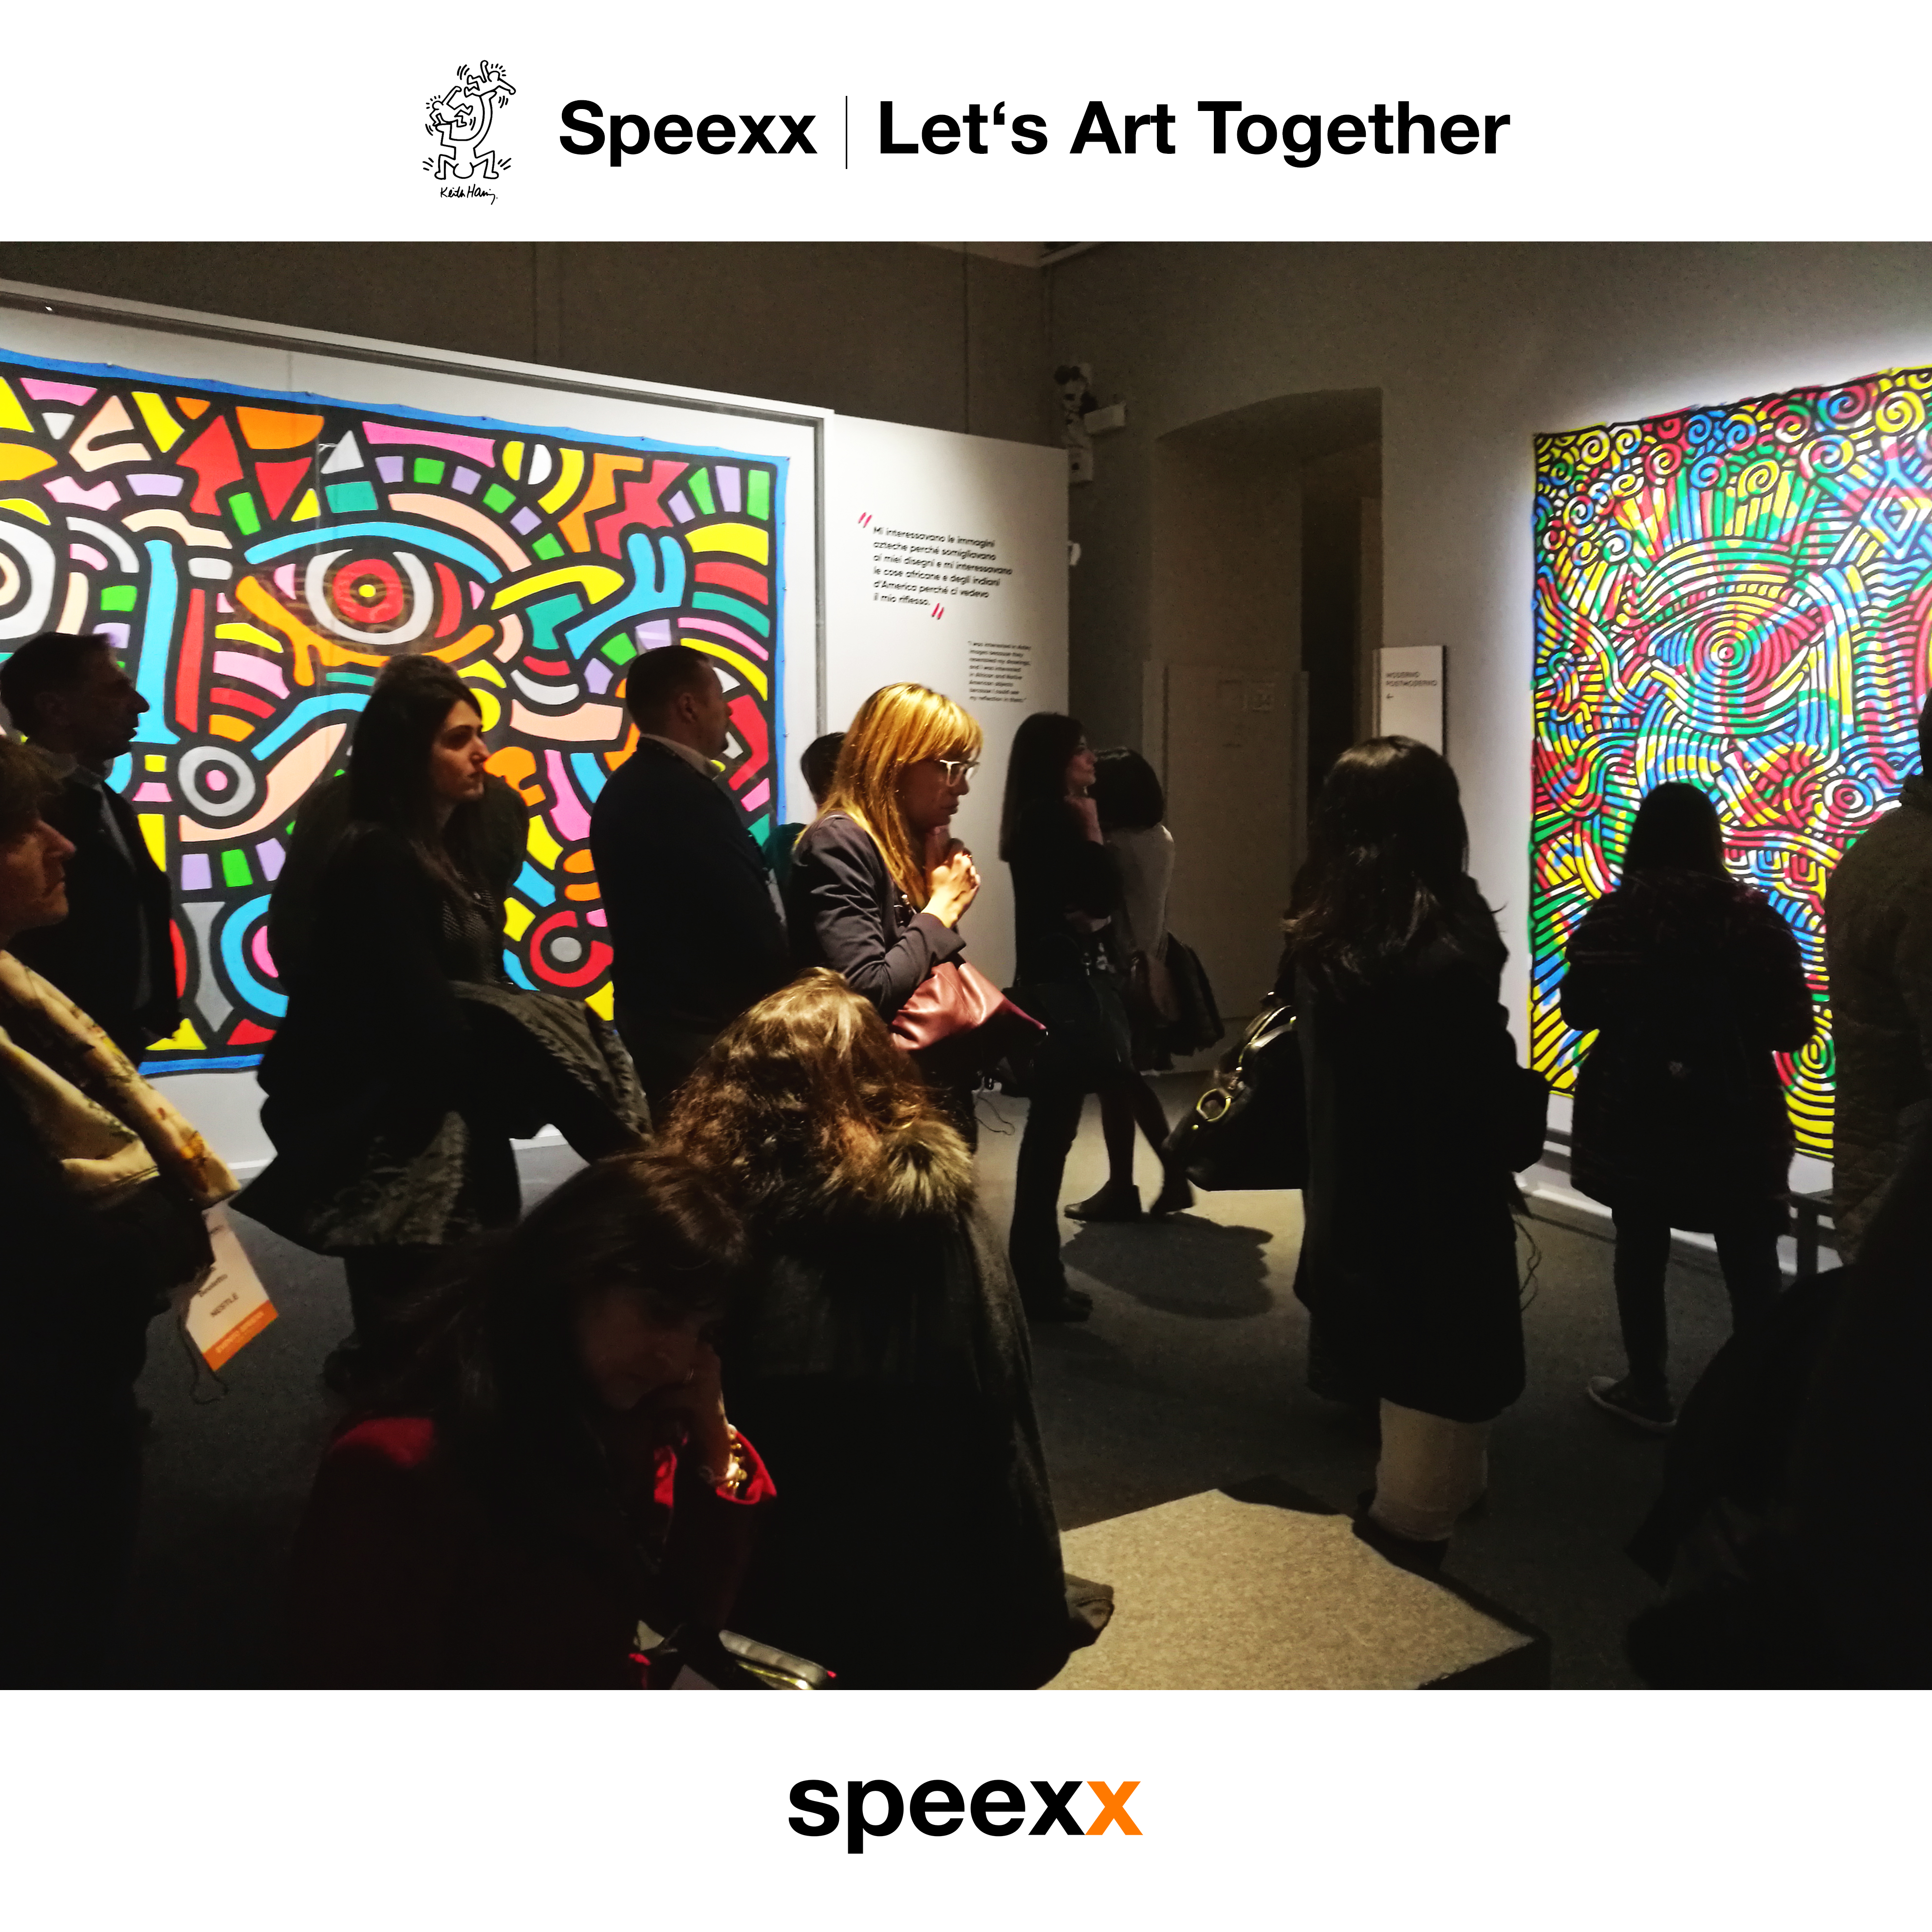 speexx let's art together - keith haring